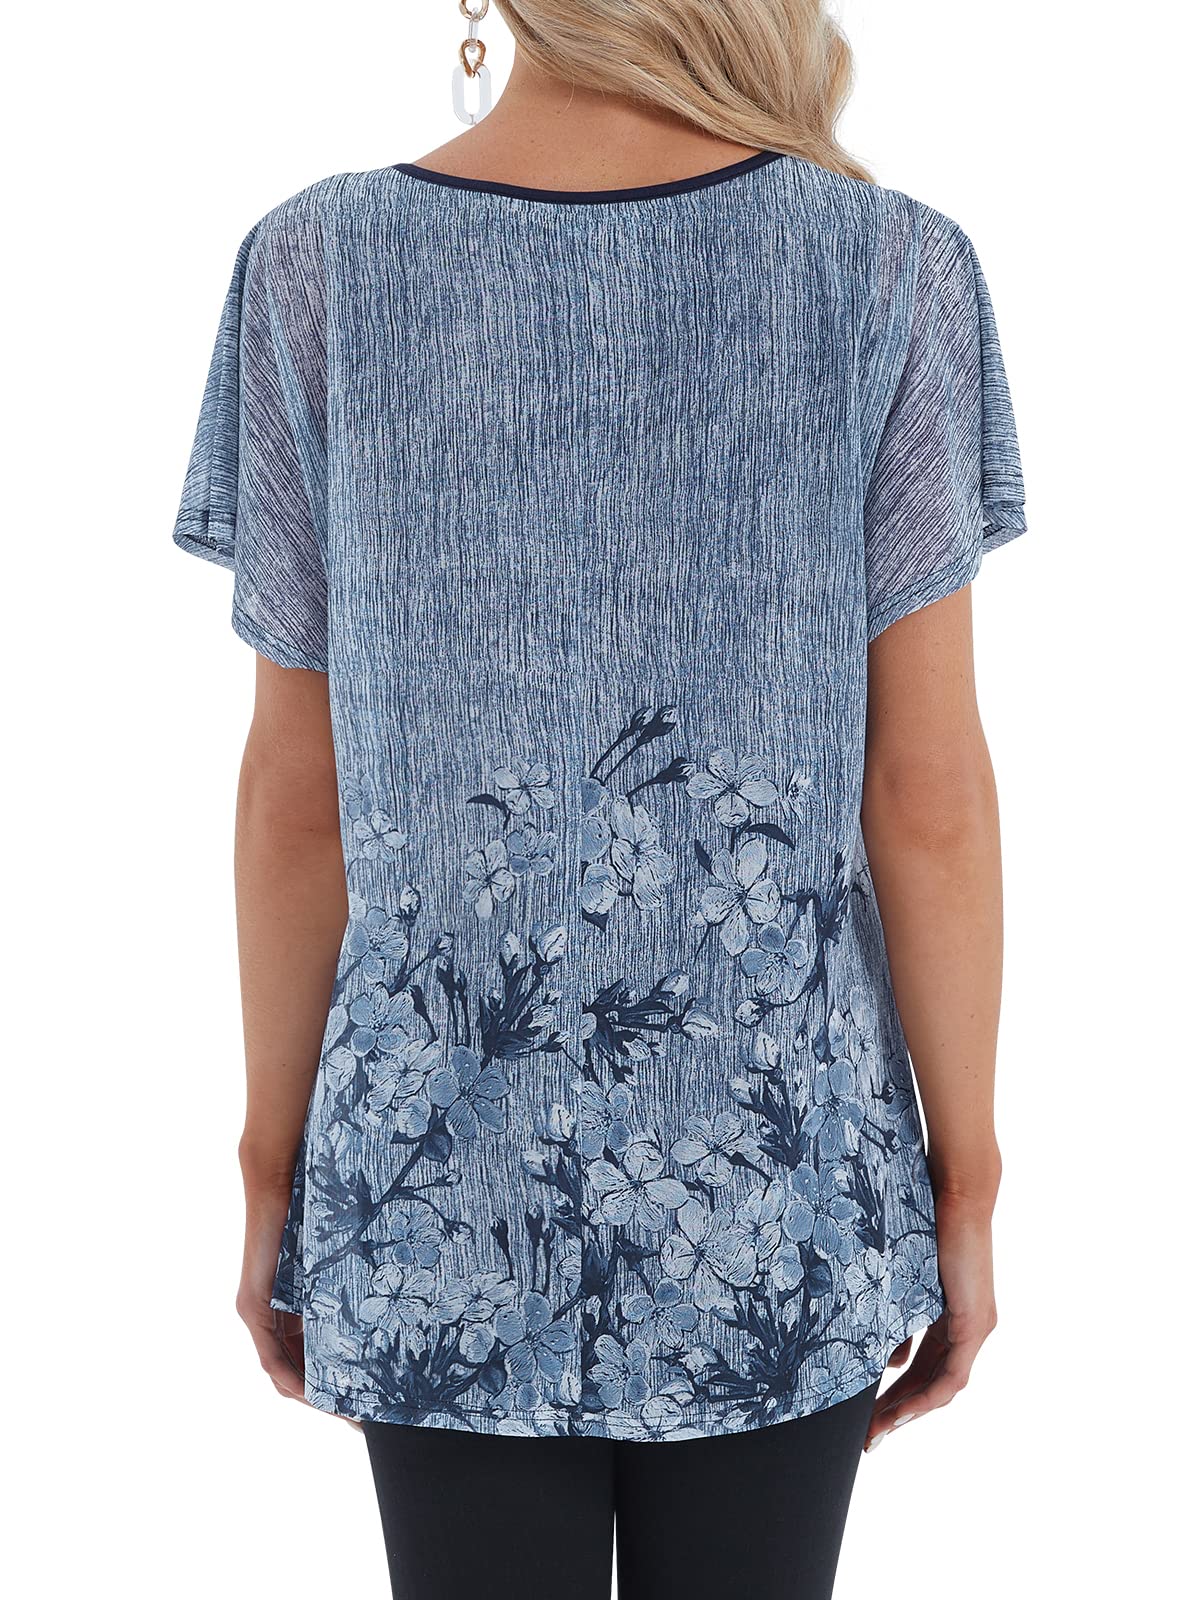 BAISHENGGT Blue Floral Womens Flouncing Flared Short Sleeve Pleated Front Mesh Blouses Tops